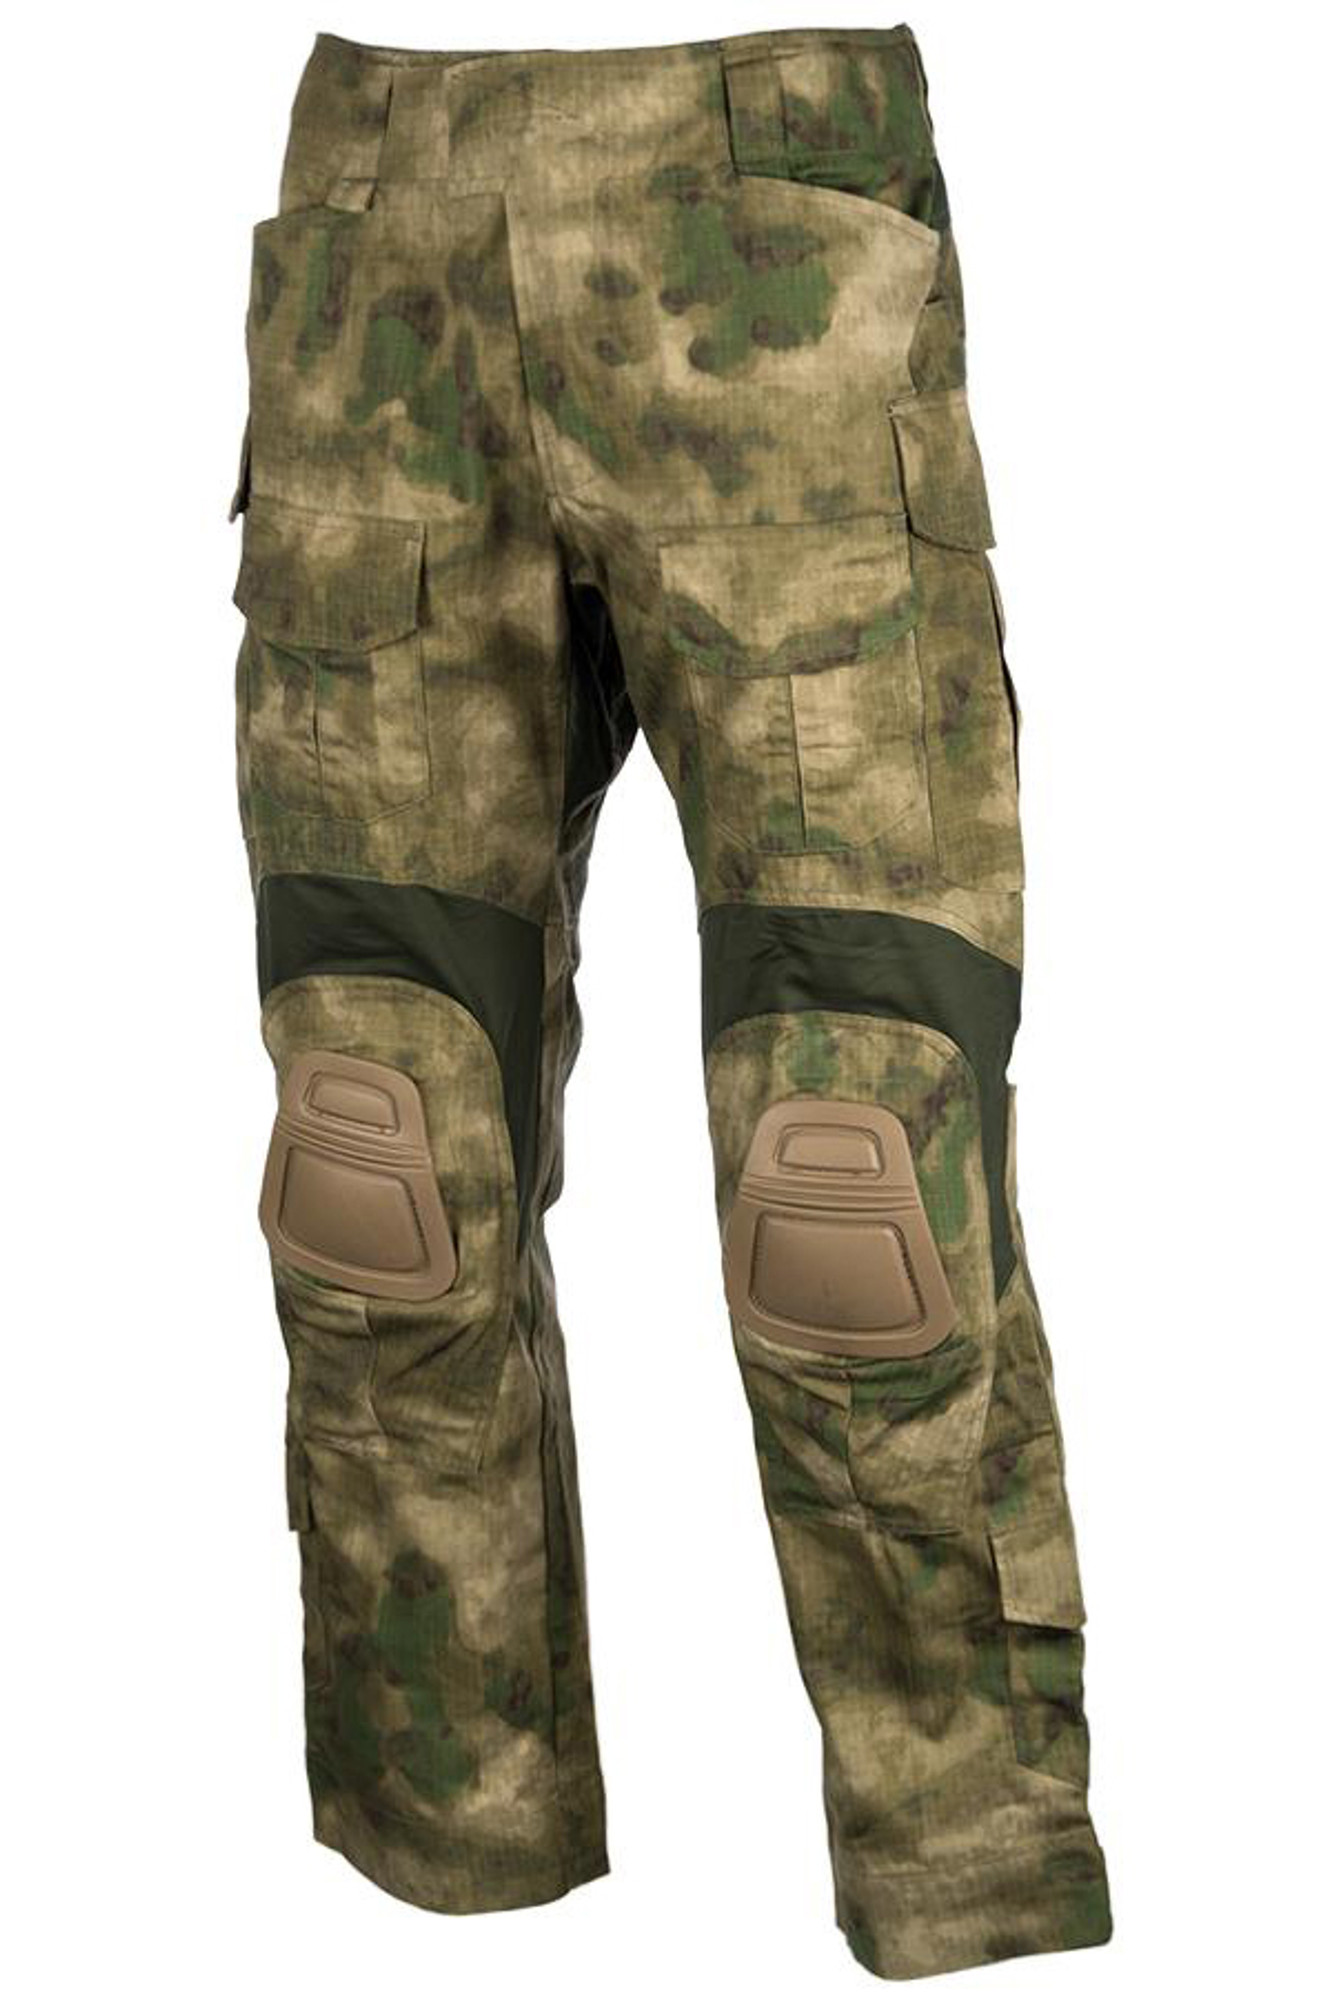 EmersonGear Combat Pants w/ Integrated Knee Pads (Color: ATACS FG)